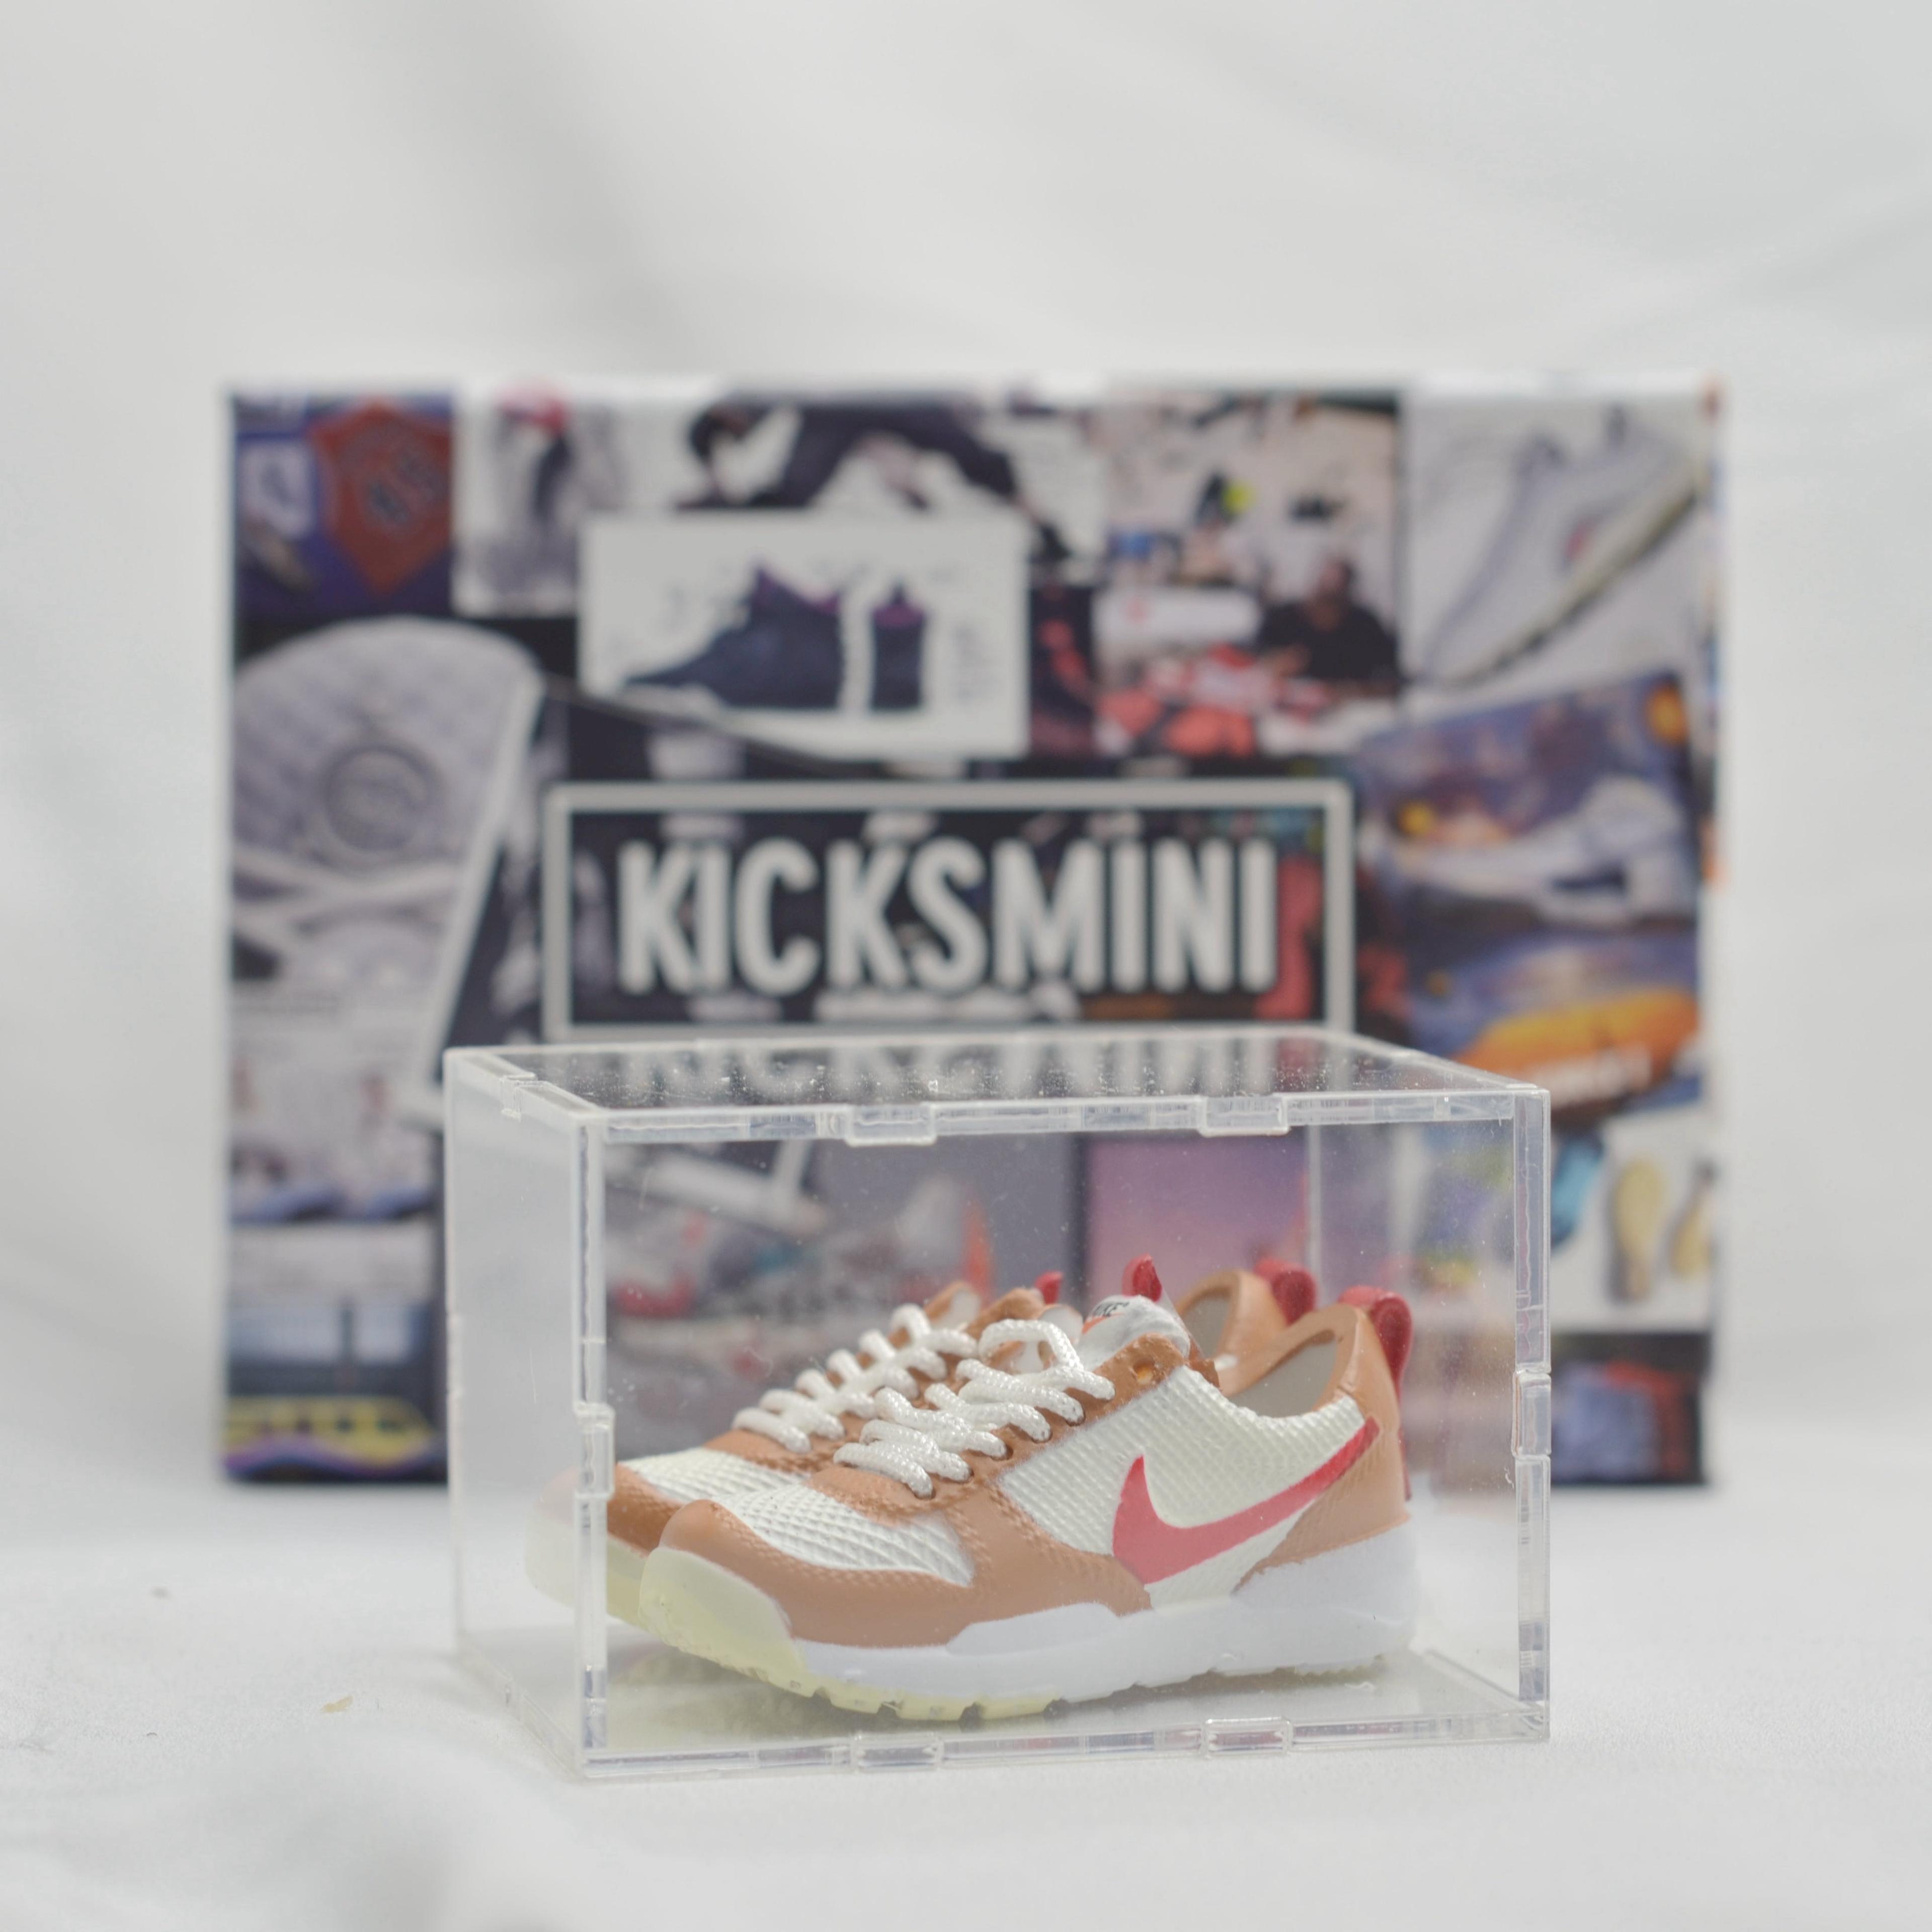 Alternate View 3 of Other Hypebeast Mini Sneakers Collection with Display Storage Ca